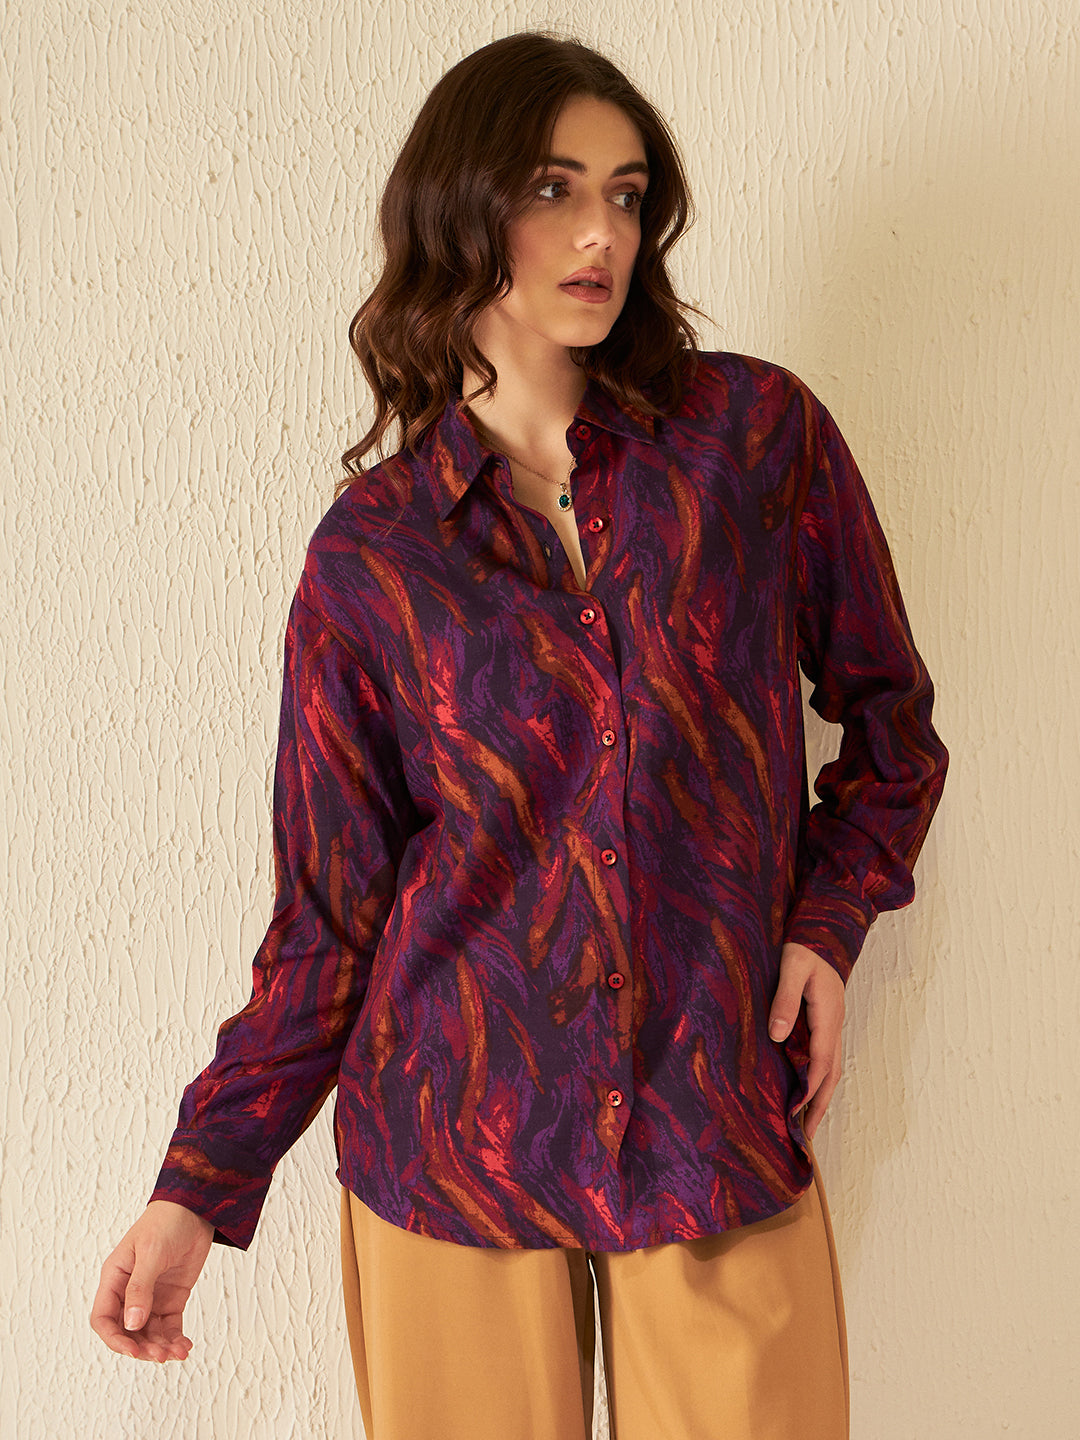 DENNISON Smart Abstract Printed Casual Shirt